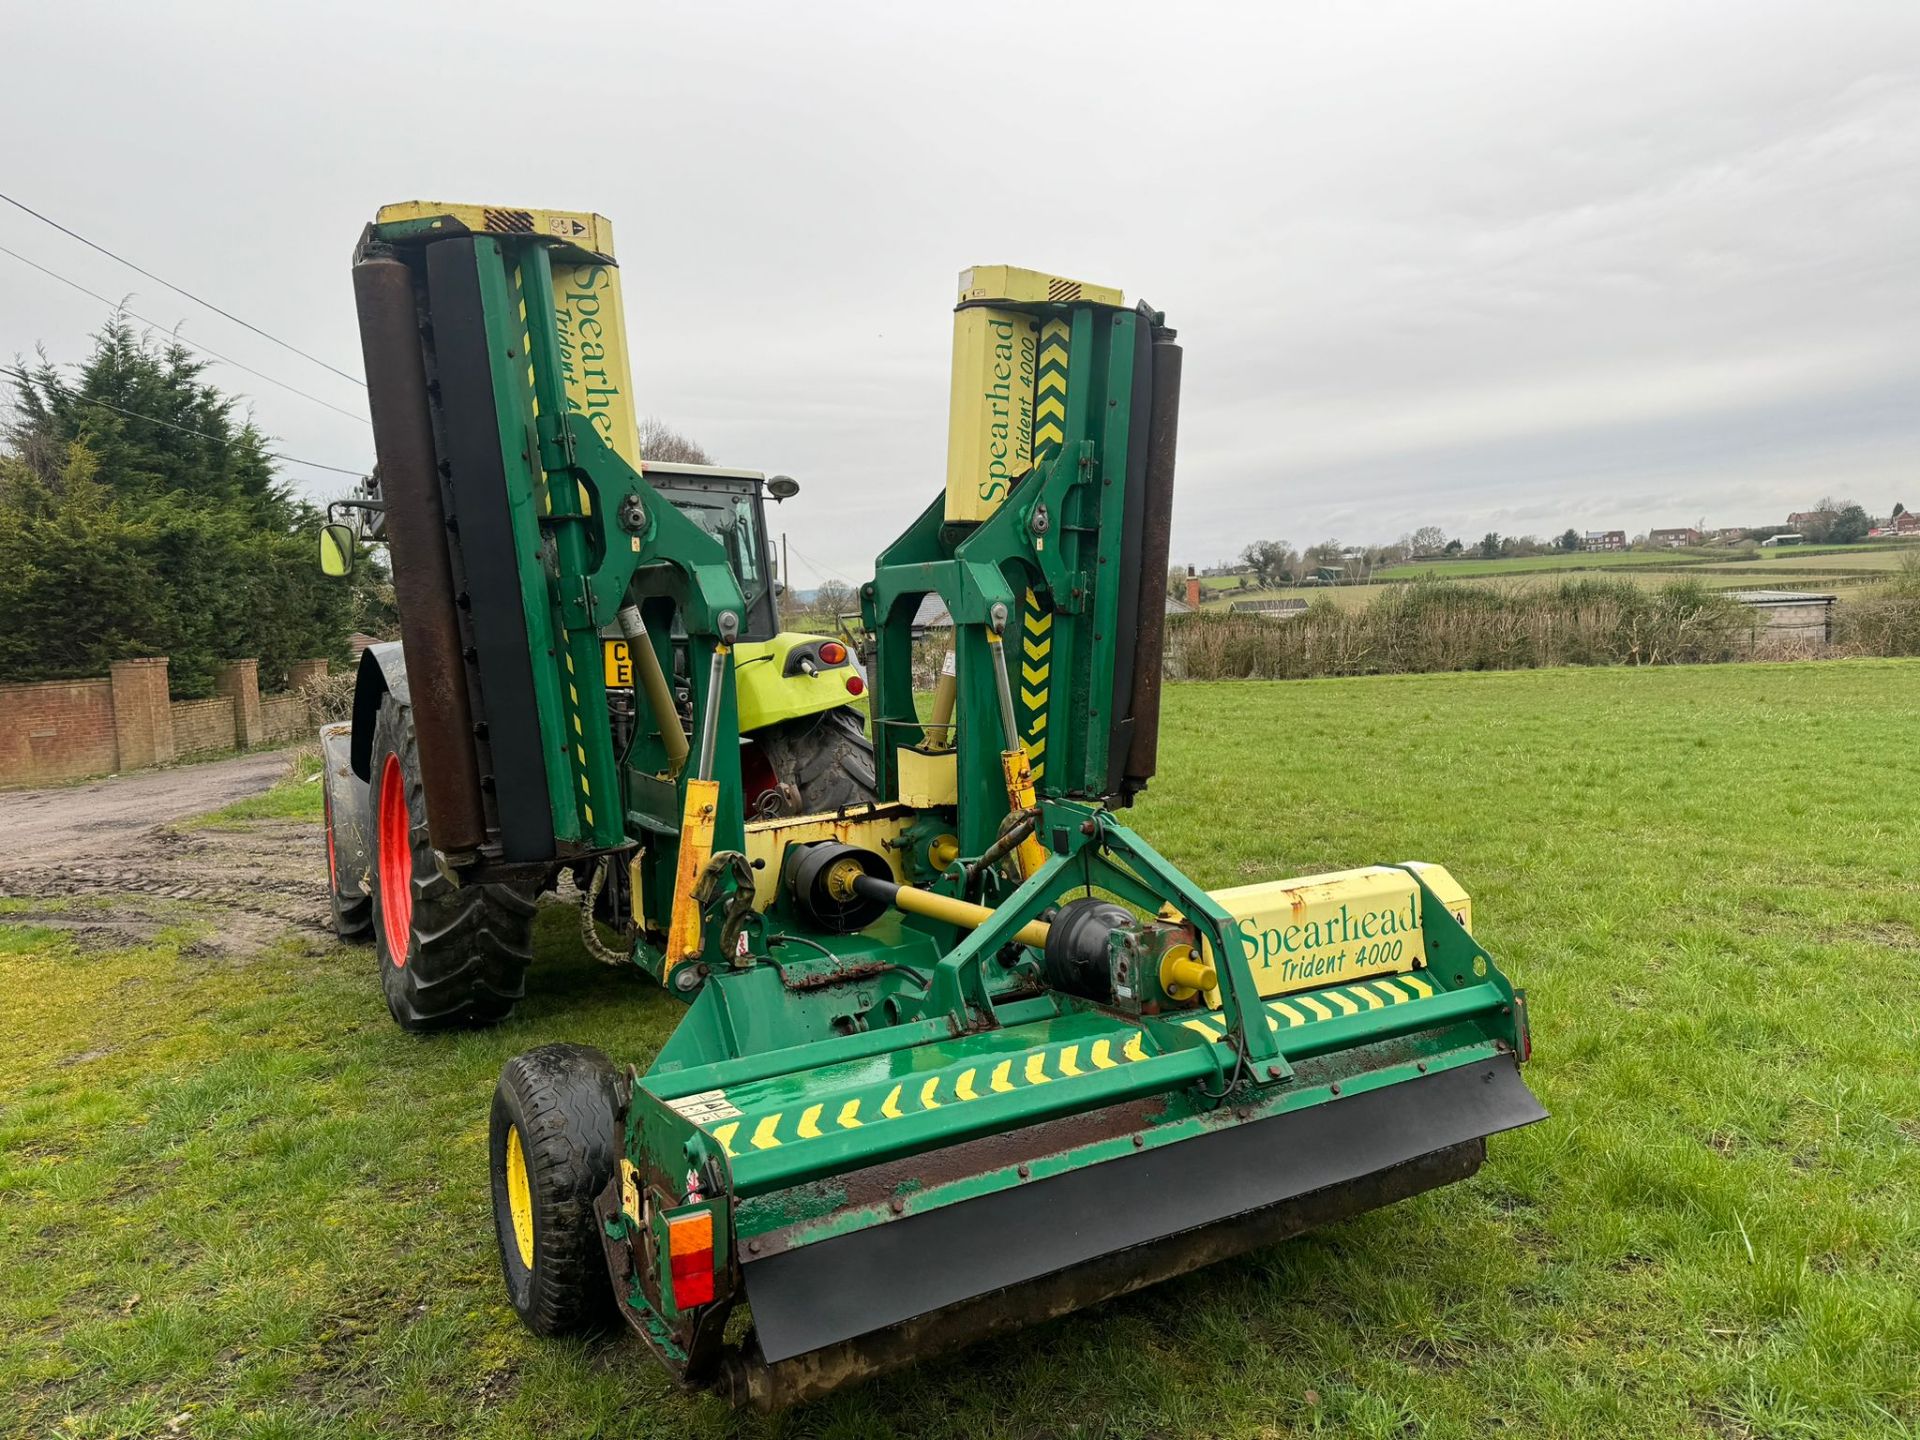 SPEARHEAD TRIDENT 4000 3 GANG TOWBEHIND FLAIL MOWER *PLUS VAT* - Image 11 of 12